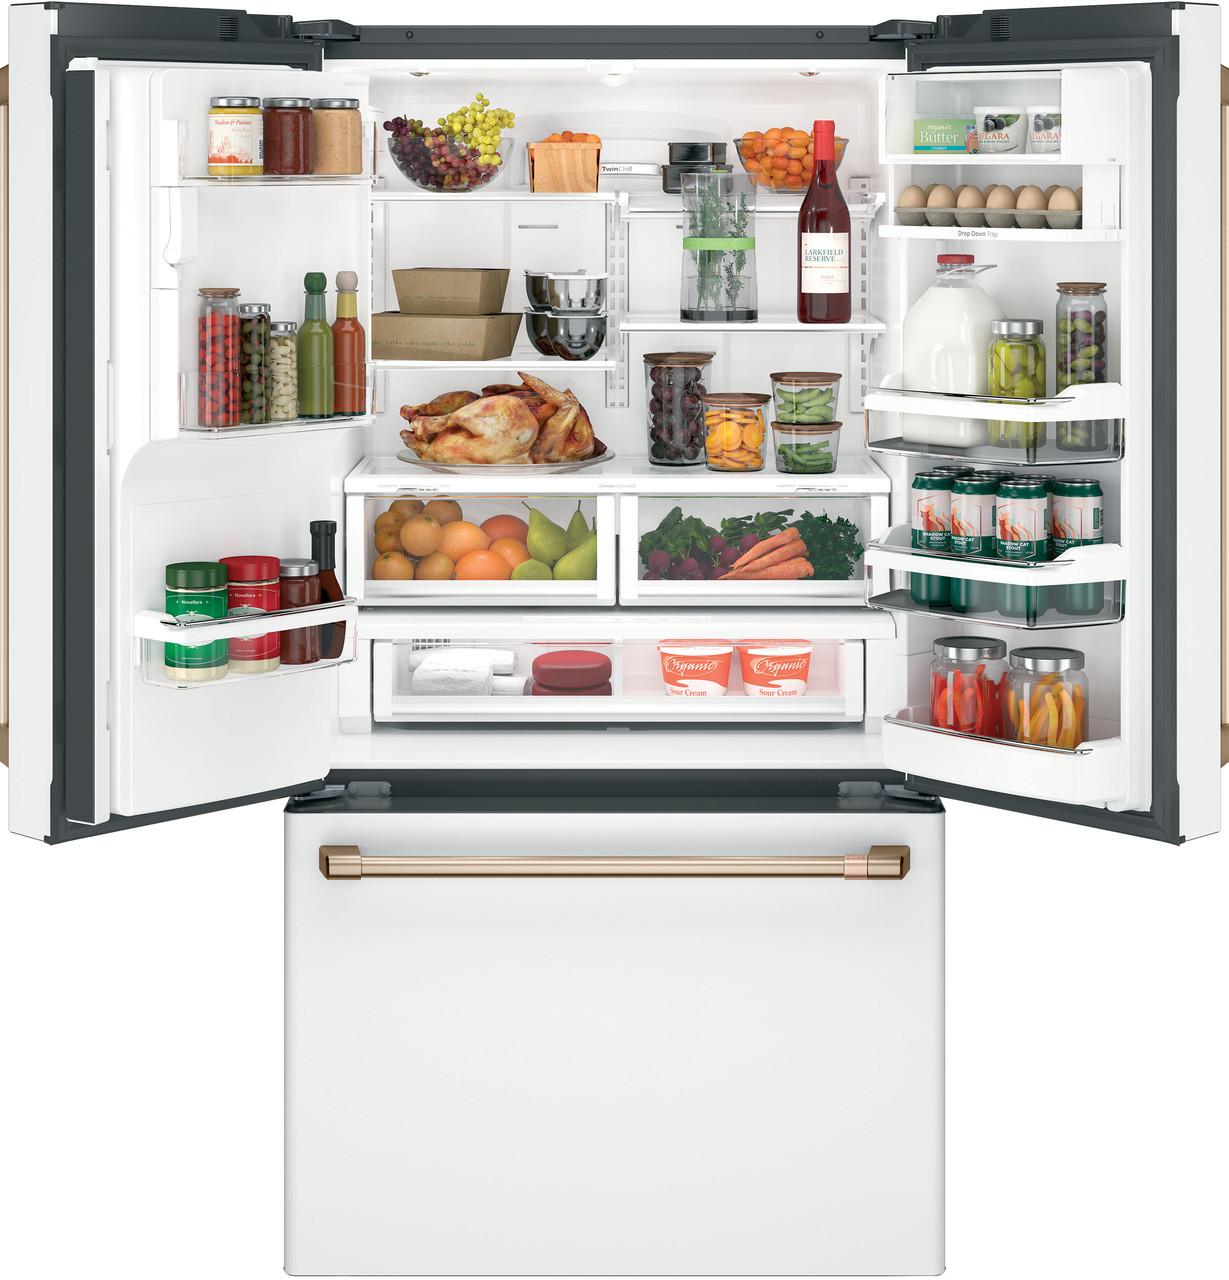 Cafe Cye22tpm 36" Wide 22.2 Cu. Ft. Counter Depth French Door Refrigerator - Matte White / - image 2 of 5